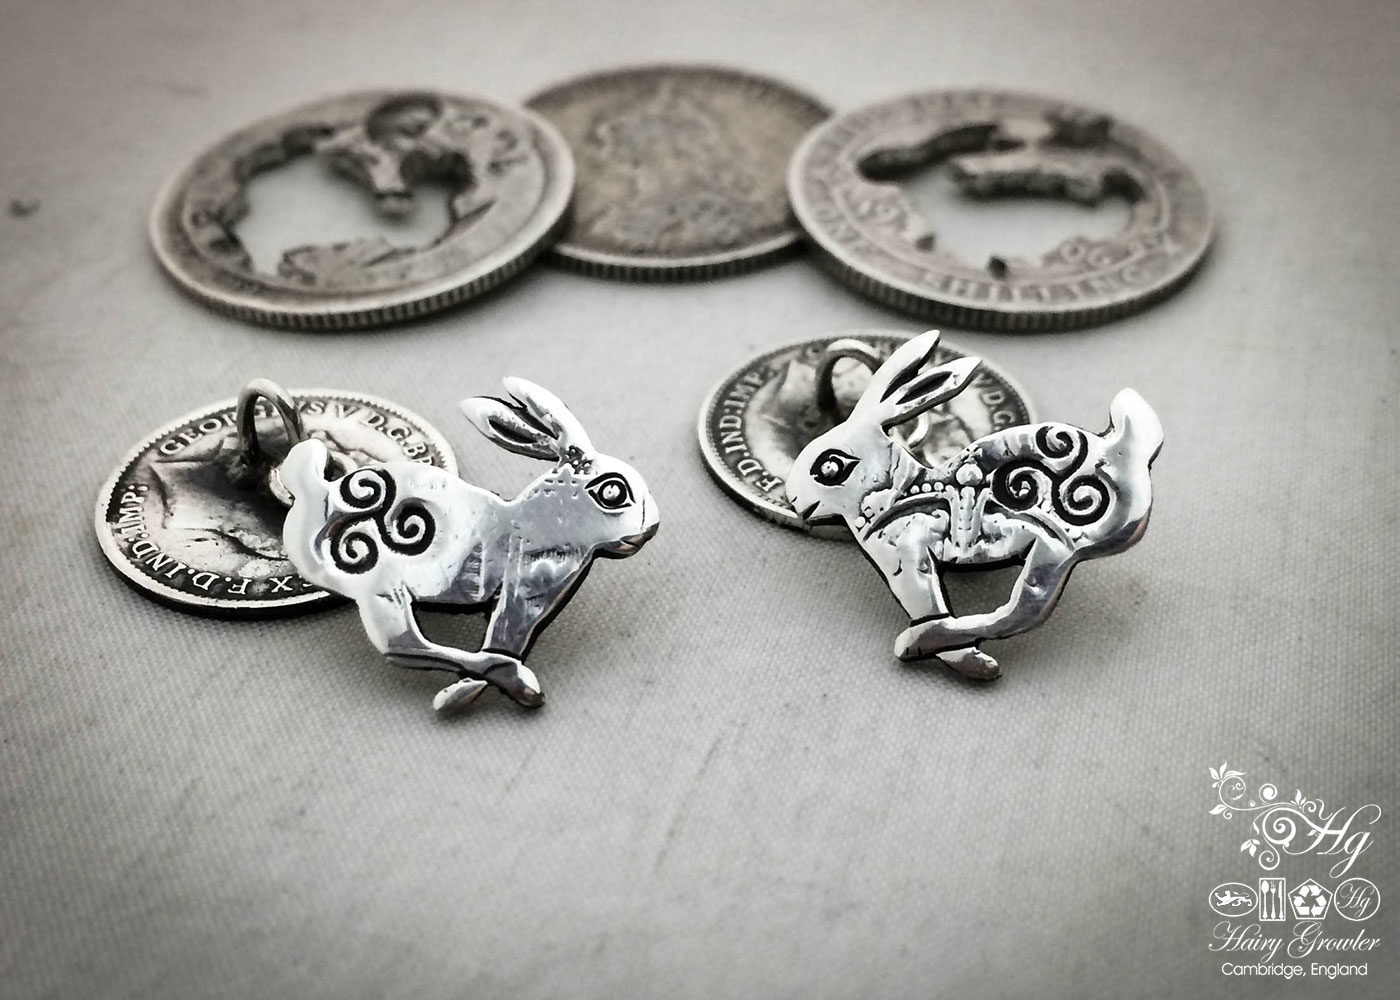 March hare cufflinks handcrafted and recycled from sterling silver shillings and threepence coins